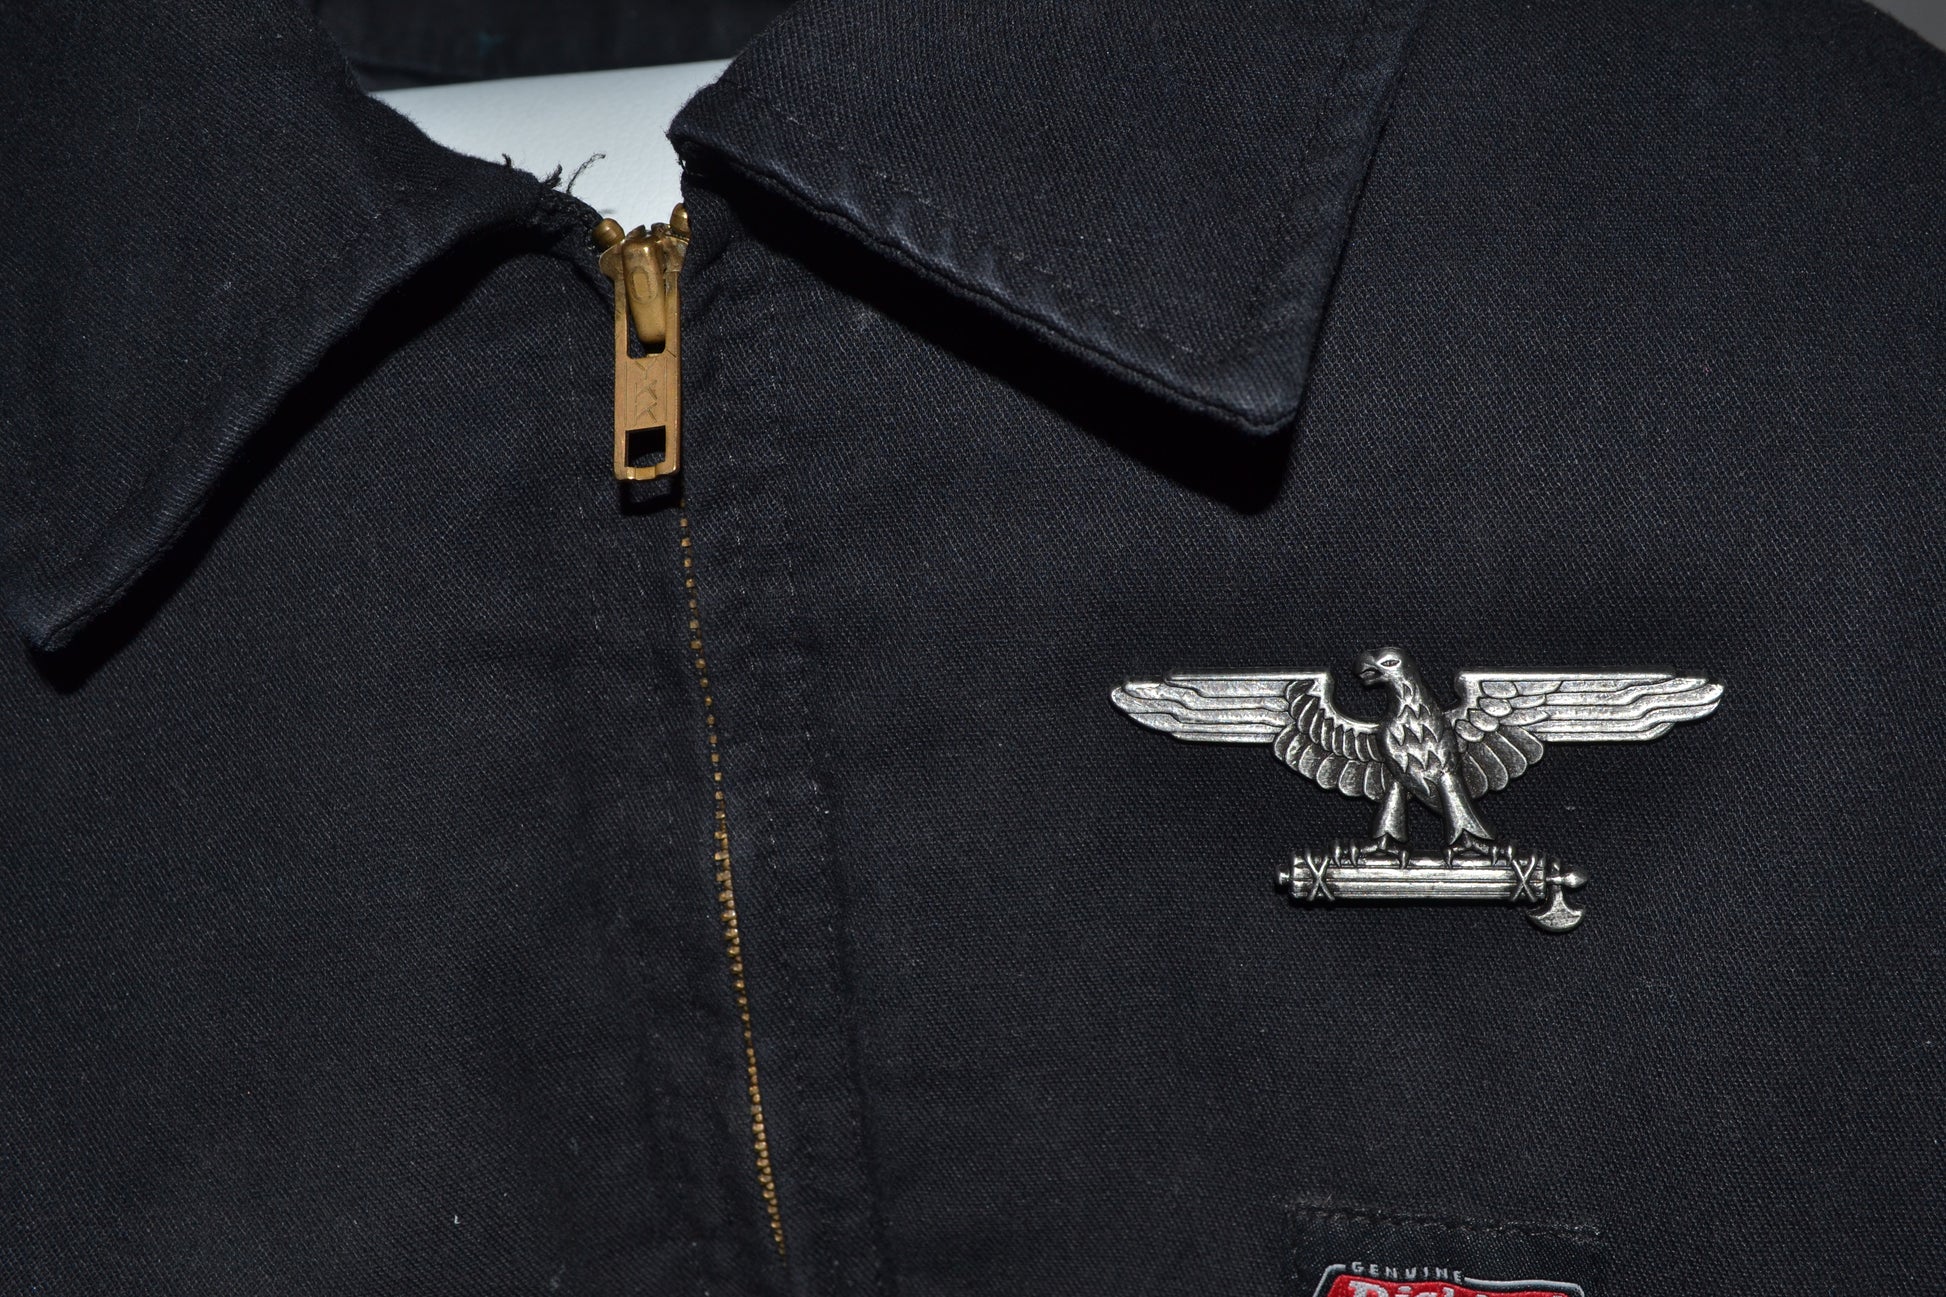 Roman/Italian Fascist Eagle with Fasces Pin on jacket/clothing. 